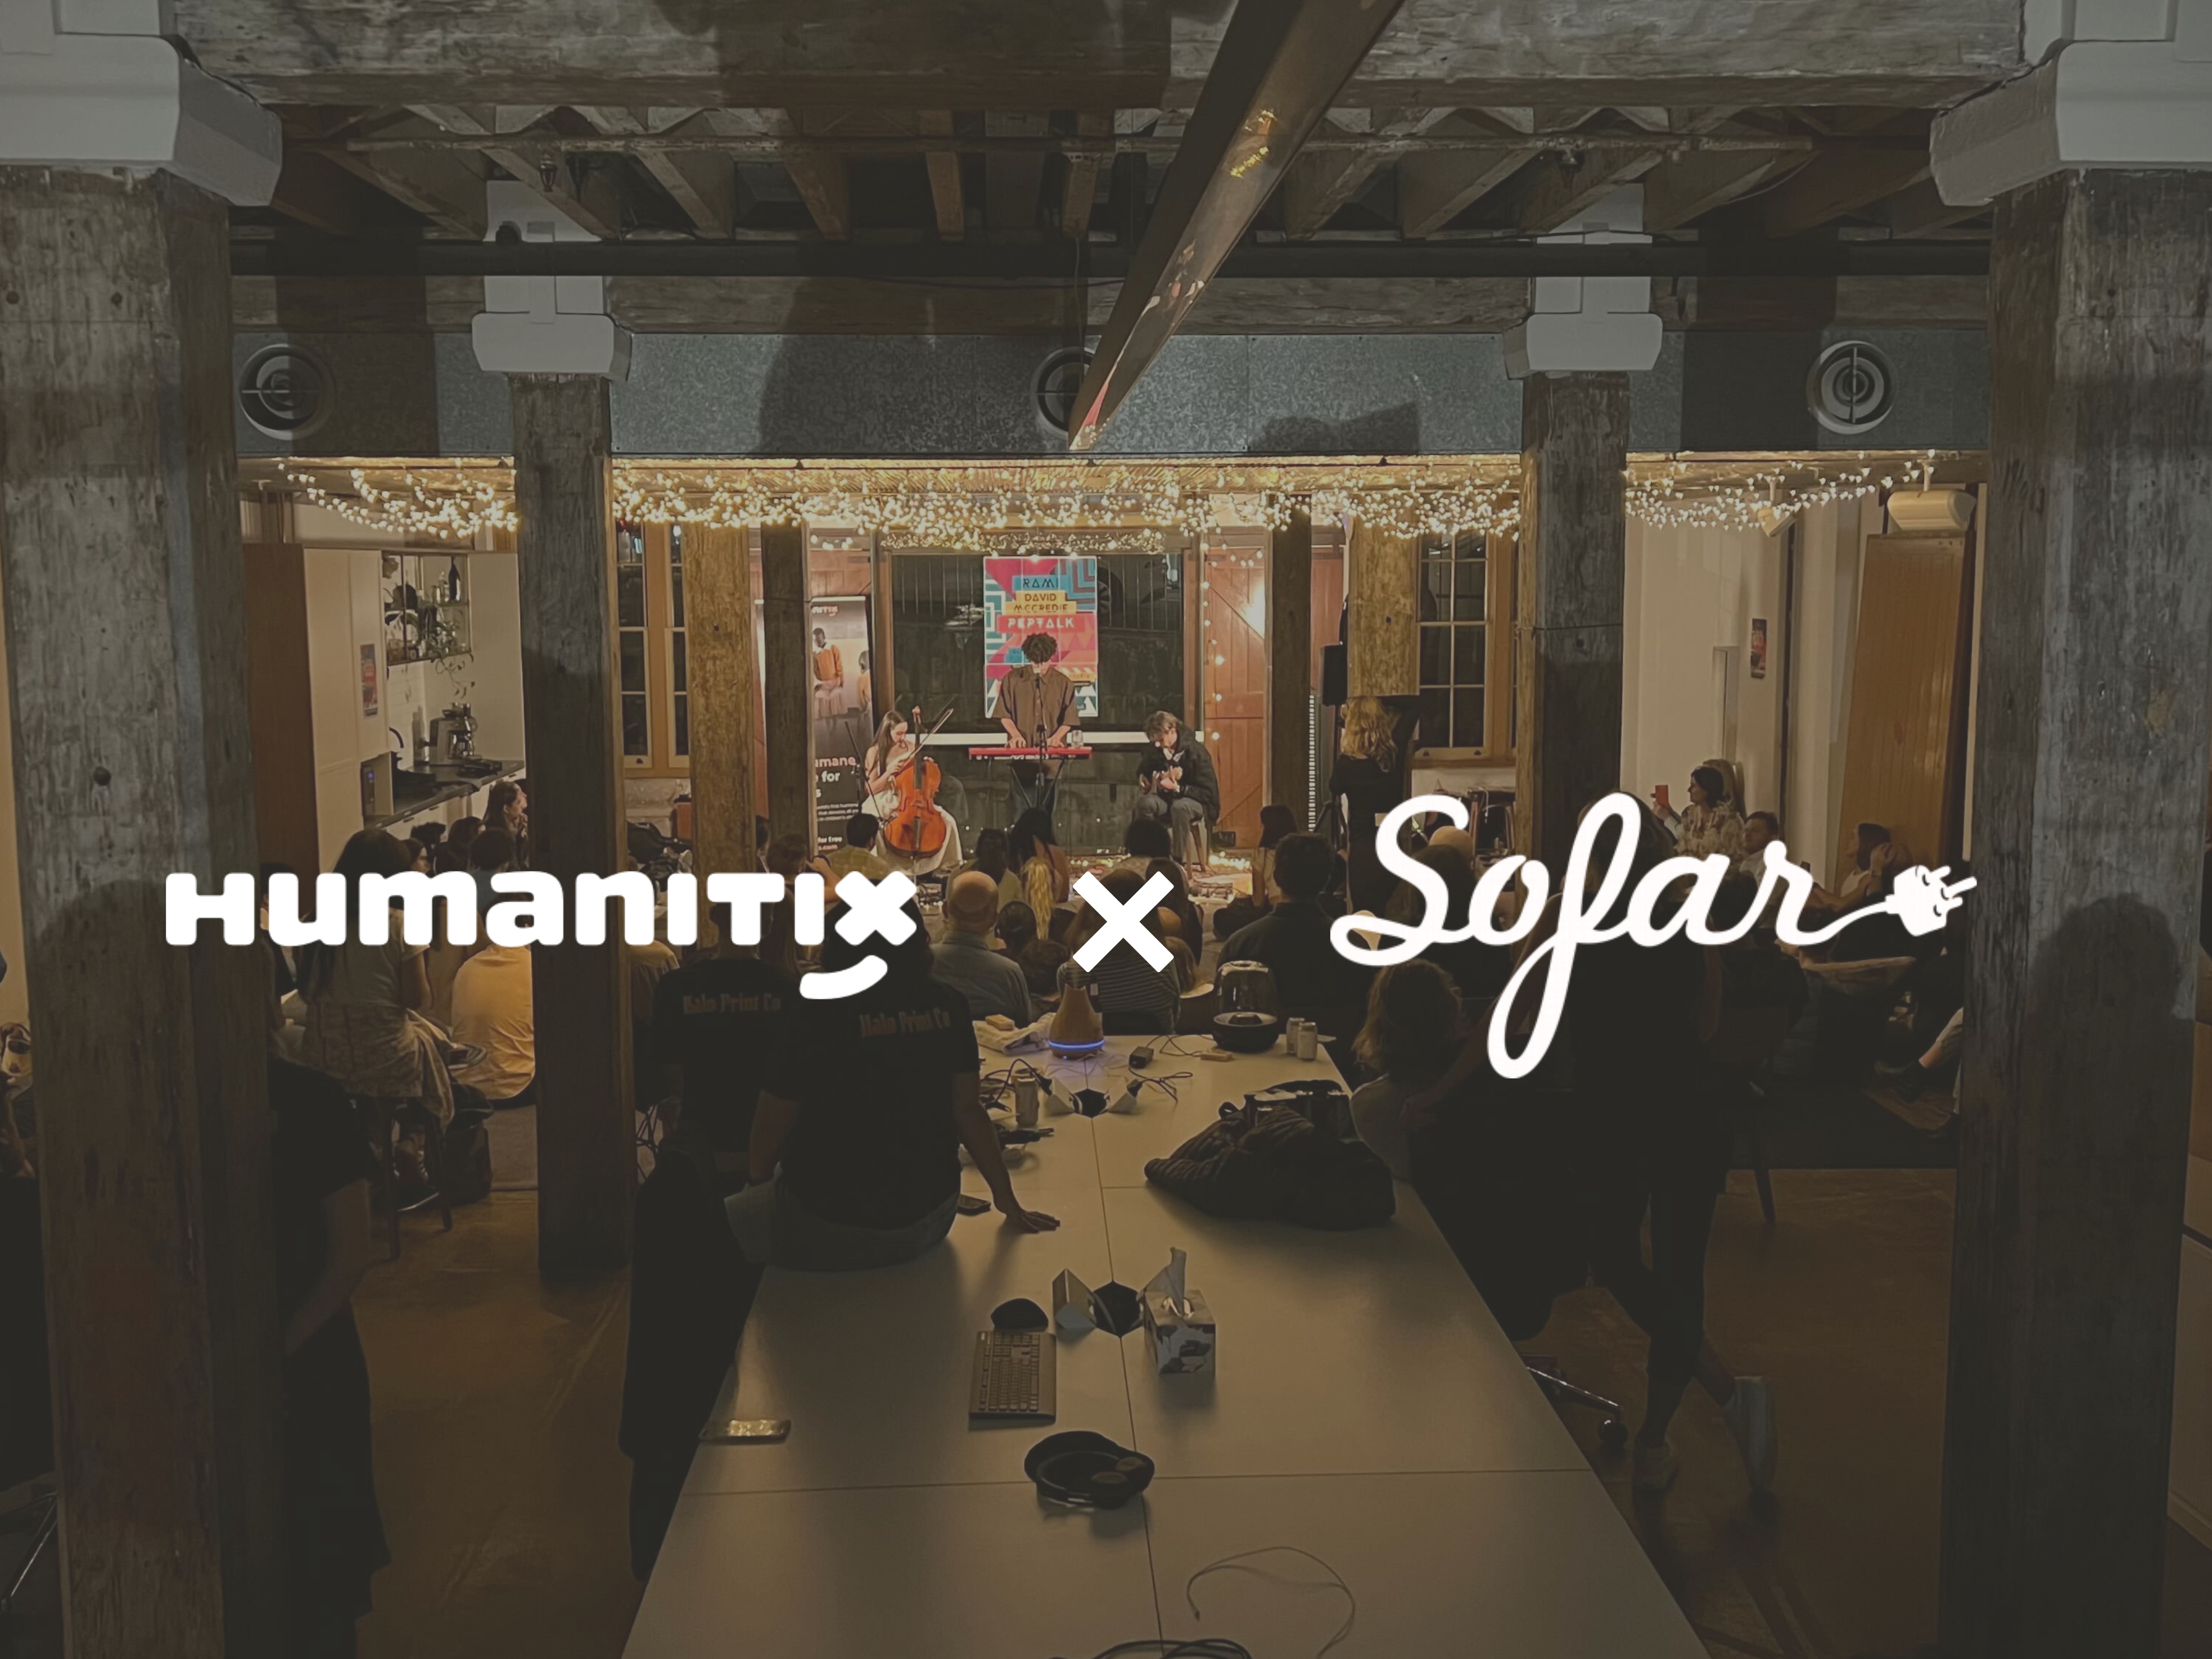 Photo of Rami playing to a seated audience surrounded by candles and fairylights with overlayed logos Humanitix x Sofar